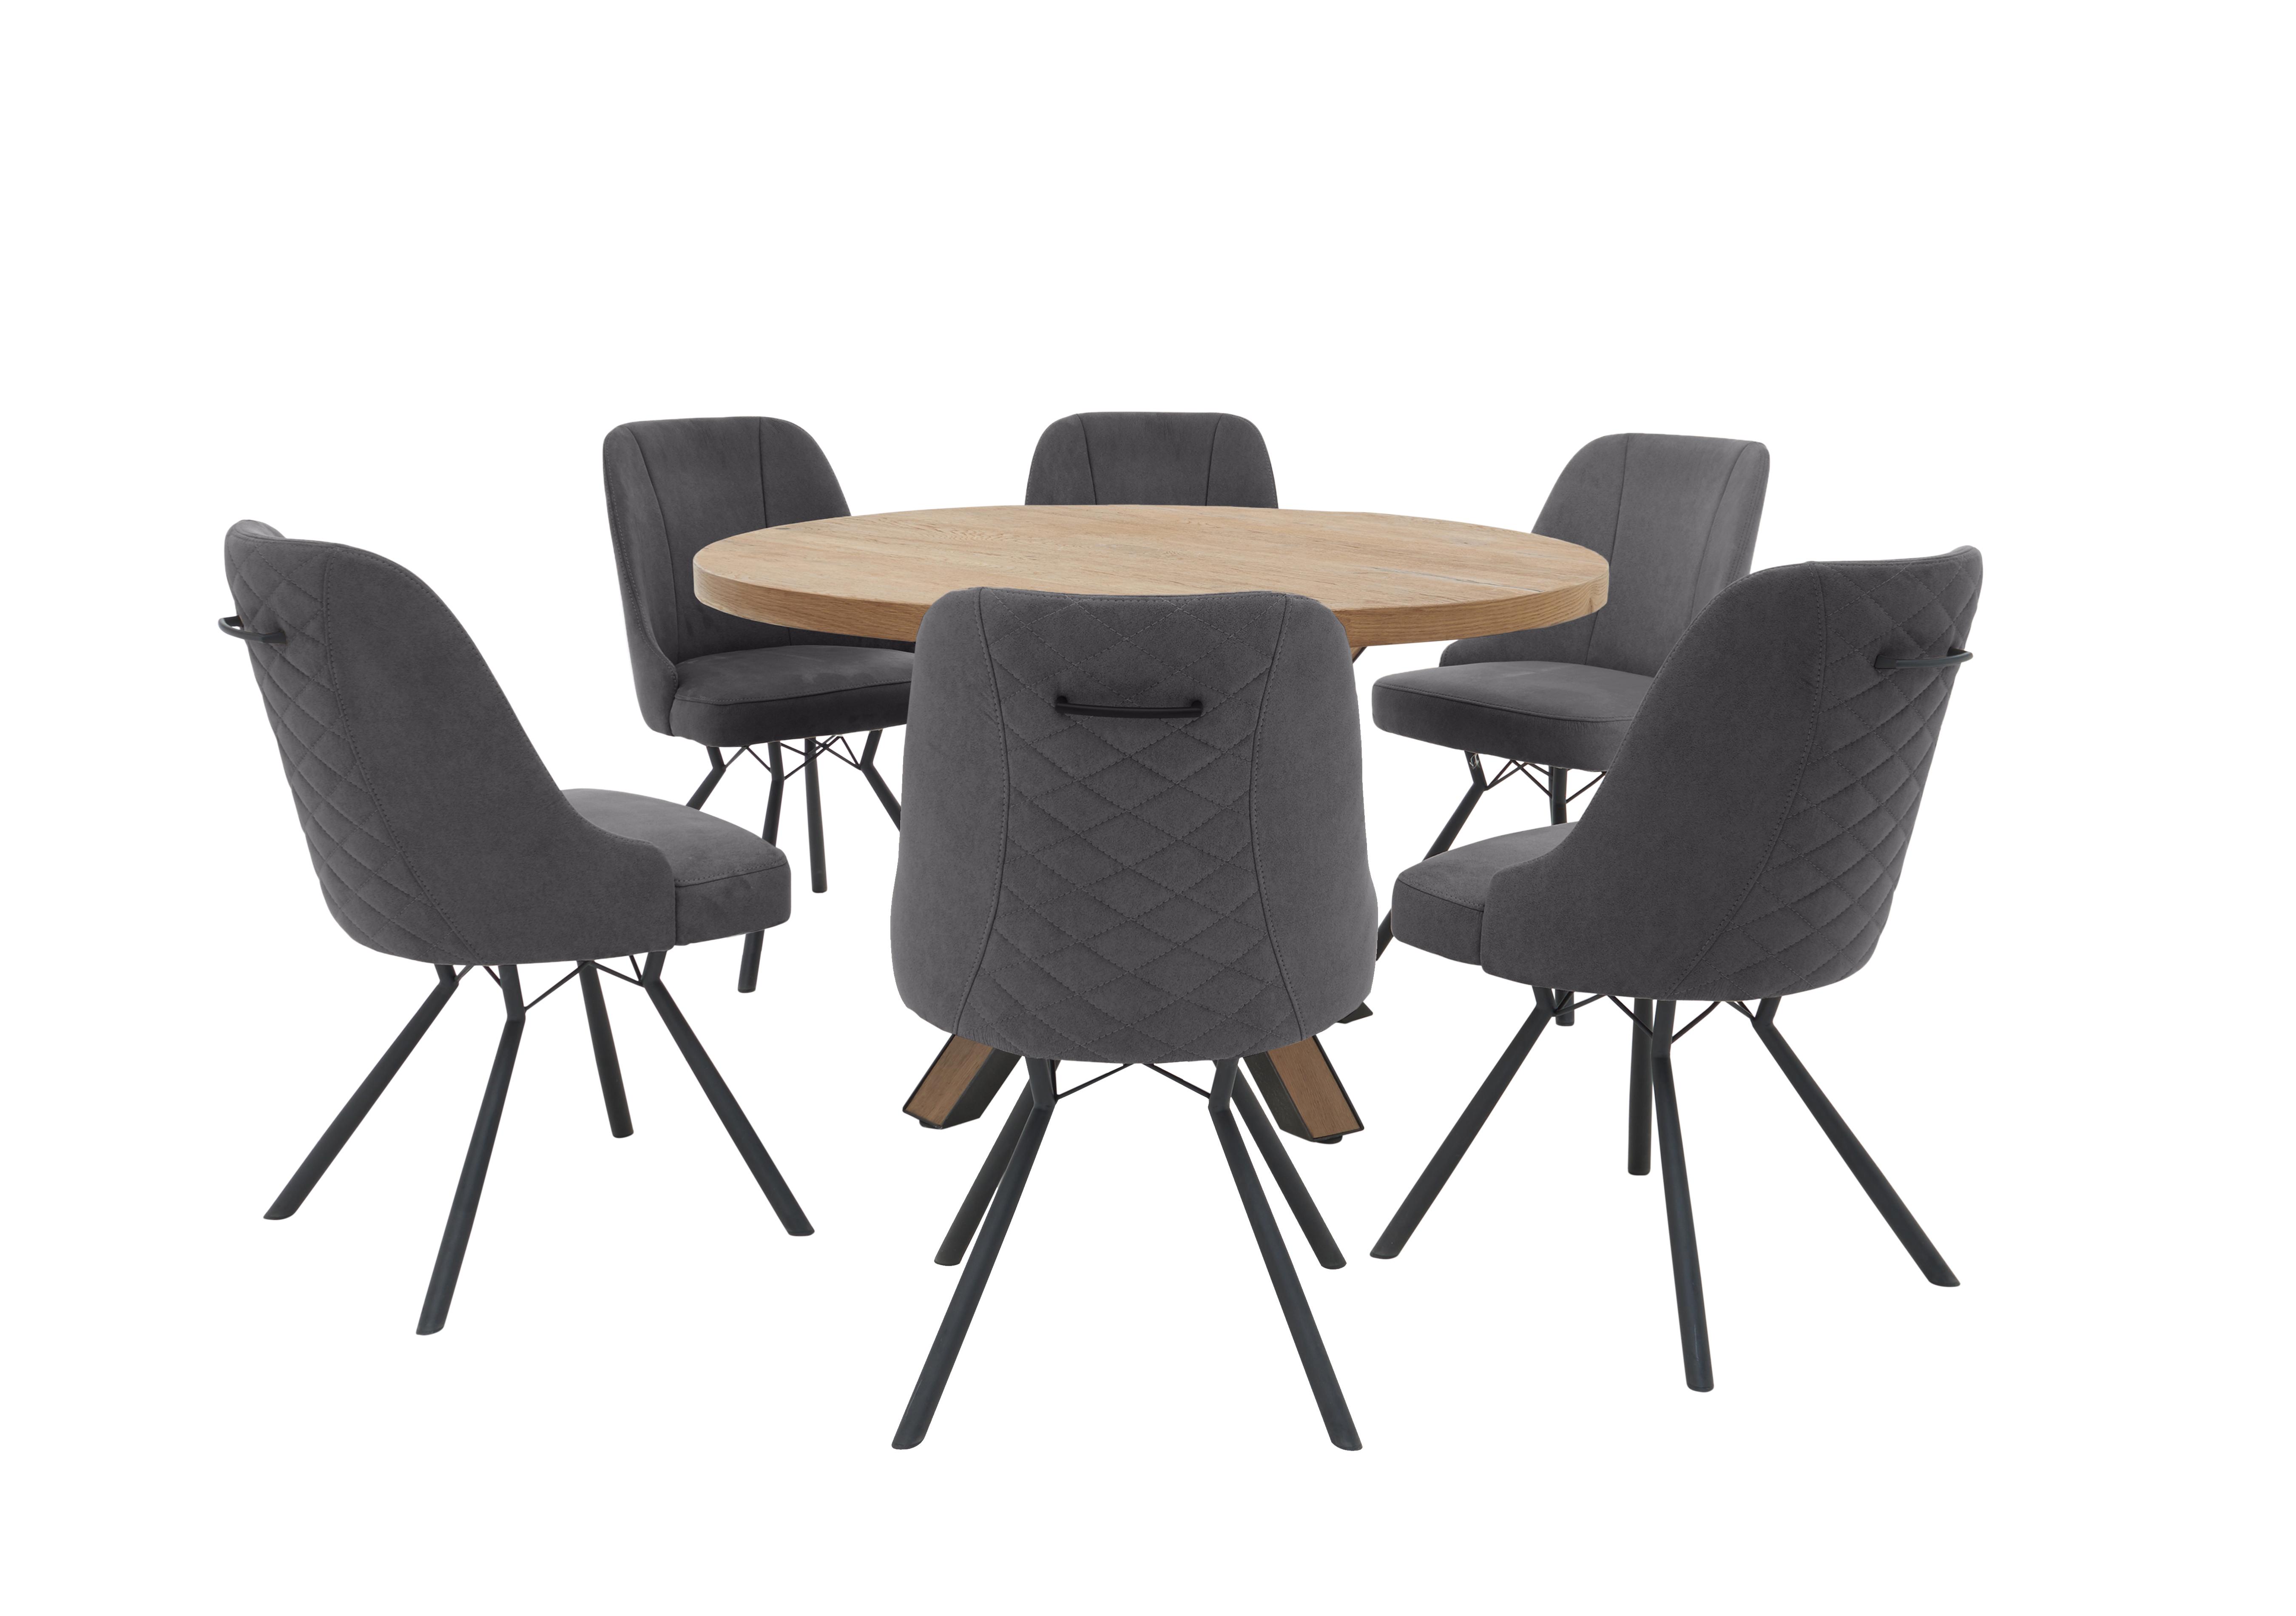 Detroit Starburst Leg Round Dining Table and 6 Detroit Dining Chairs in Anthracite on Furniture Village